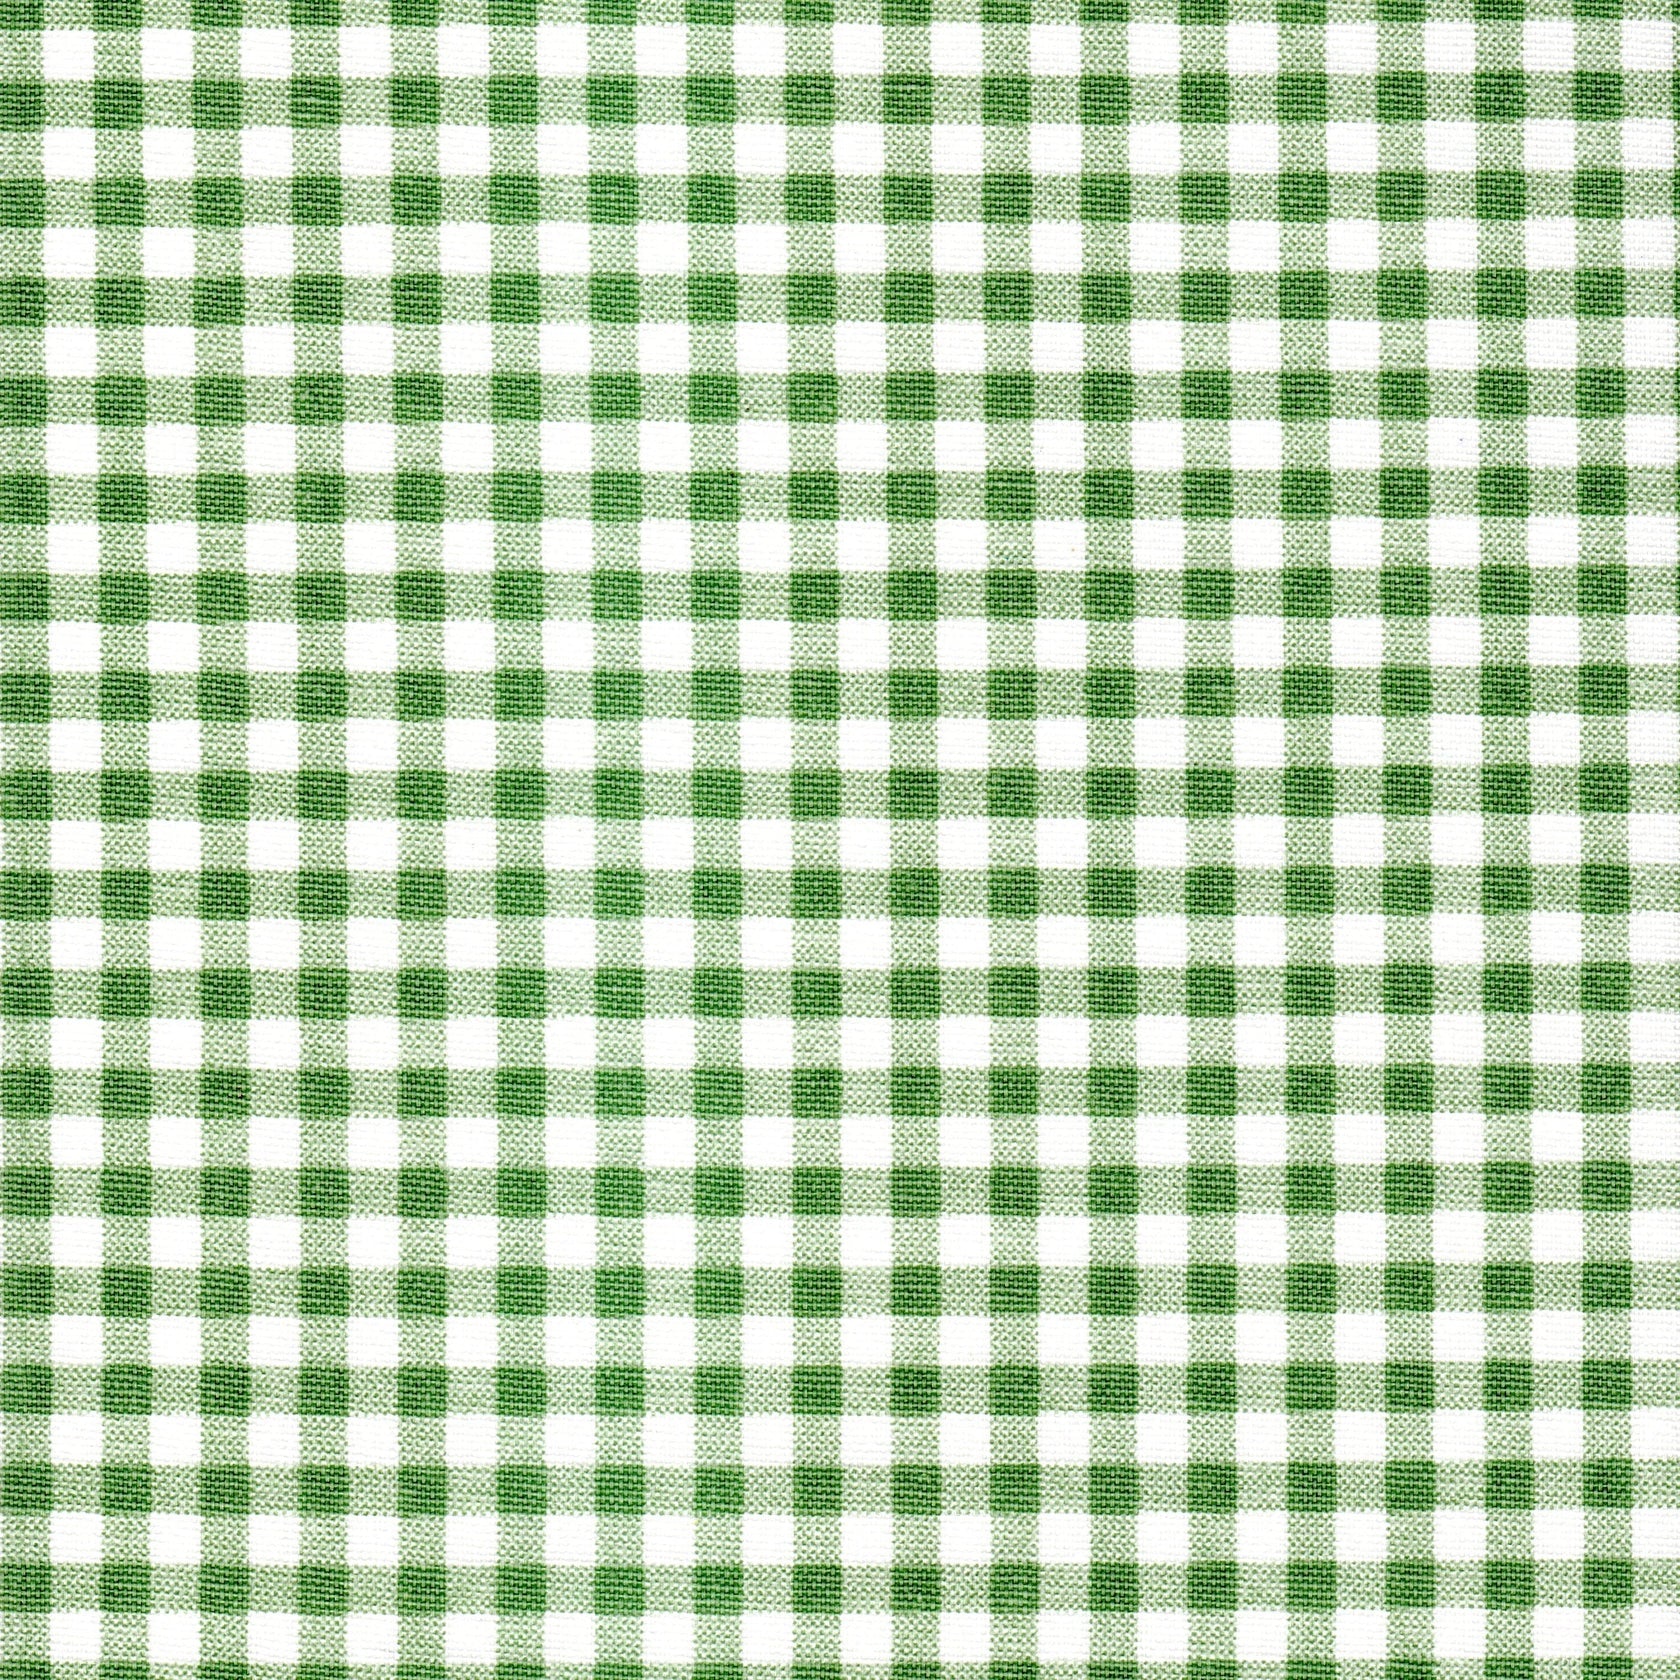 Gathered Bedskirt in Sage Green Large Gingham Check on White